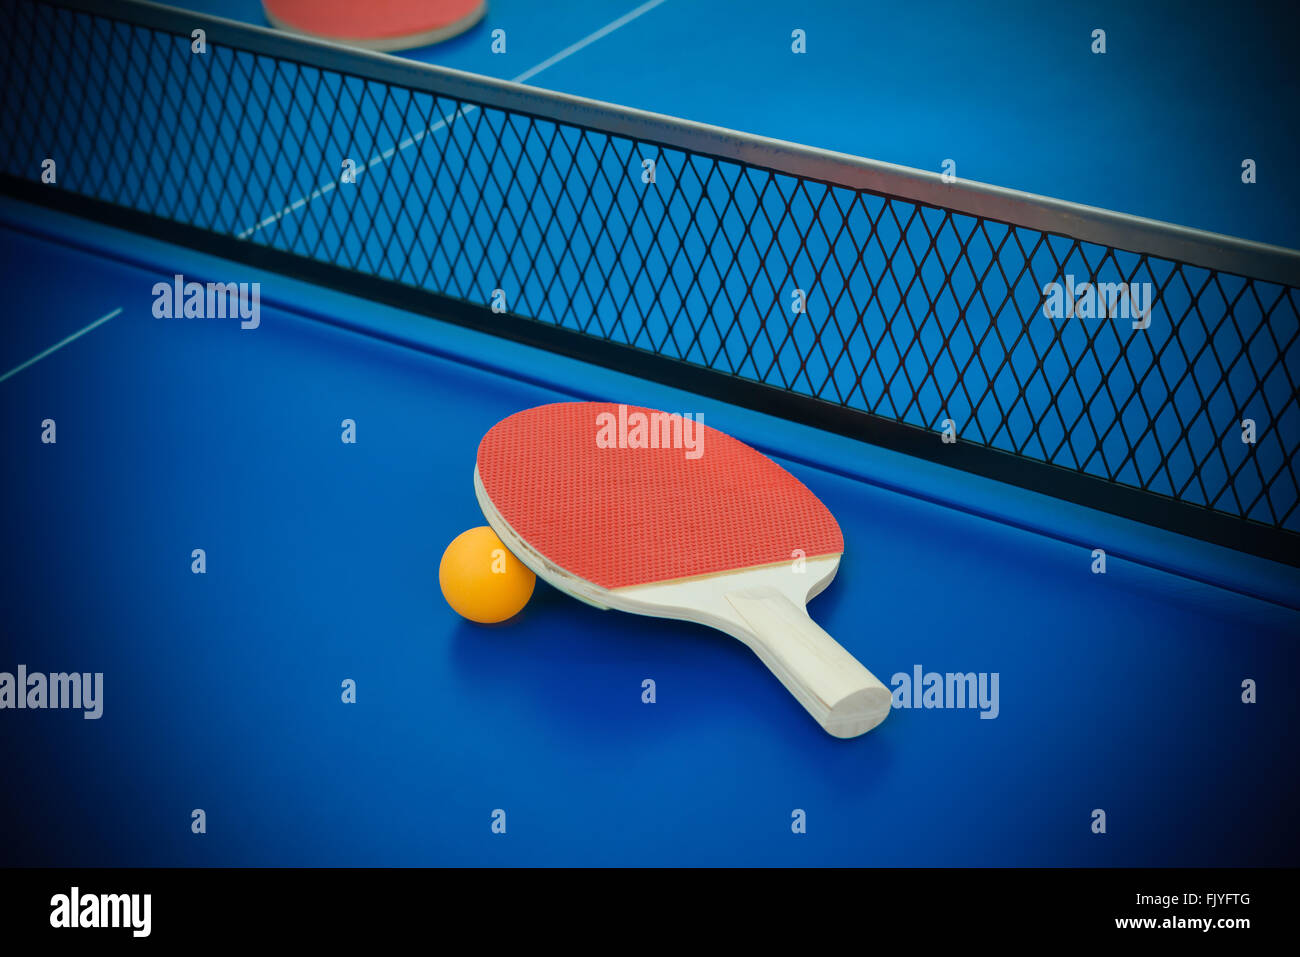 pingpong rackets and ball highlighted on a blue pingpong table Stock Photo